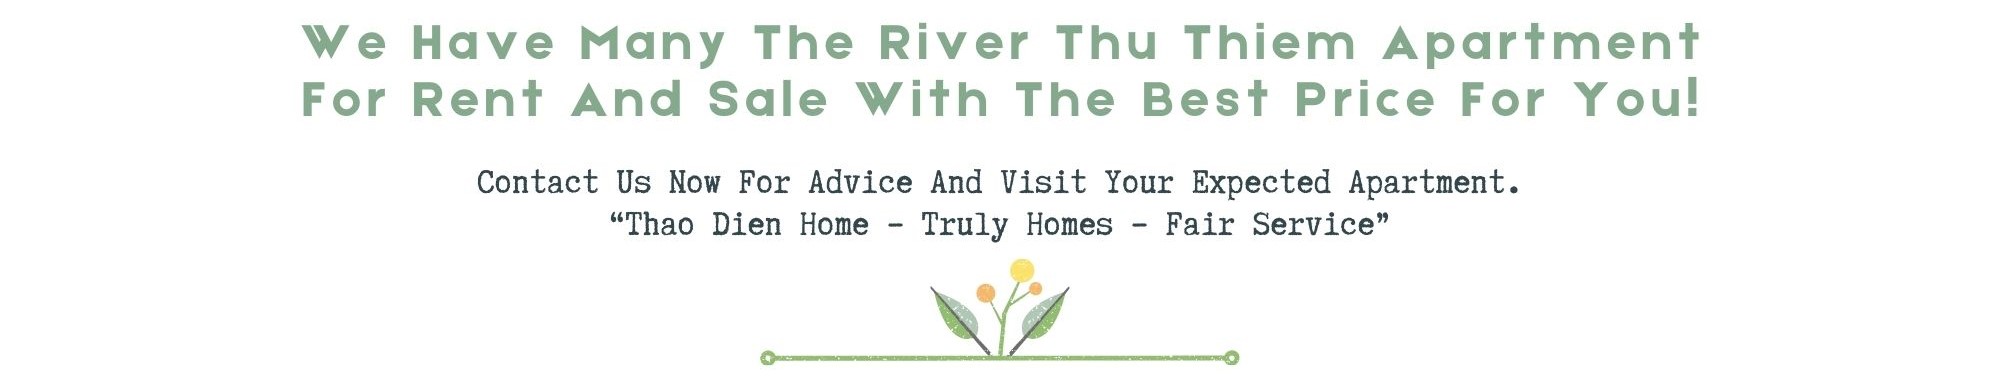 We Have Many The River Thu Thiem Apartment For Rent And Sale With The Best Price For You Contact Us Now For Advice And Visit Your Expected Apartment. Thao Dien Home – Truly Homes – Fair Service - Luxury Investment Opportunity: The River Thu Thiem 3 Bedrooms